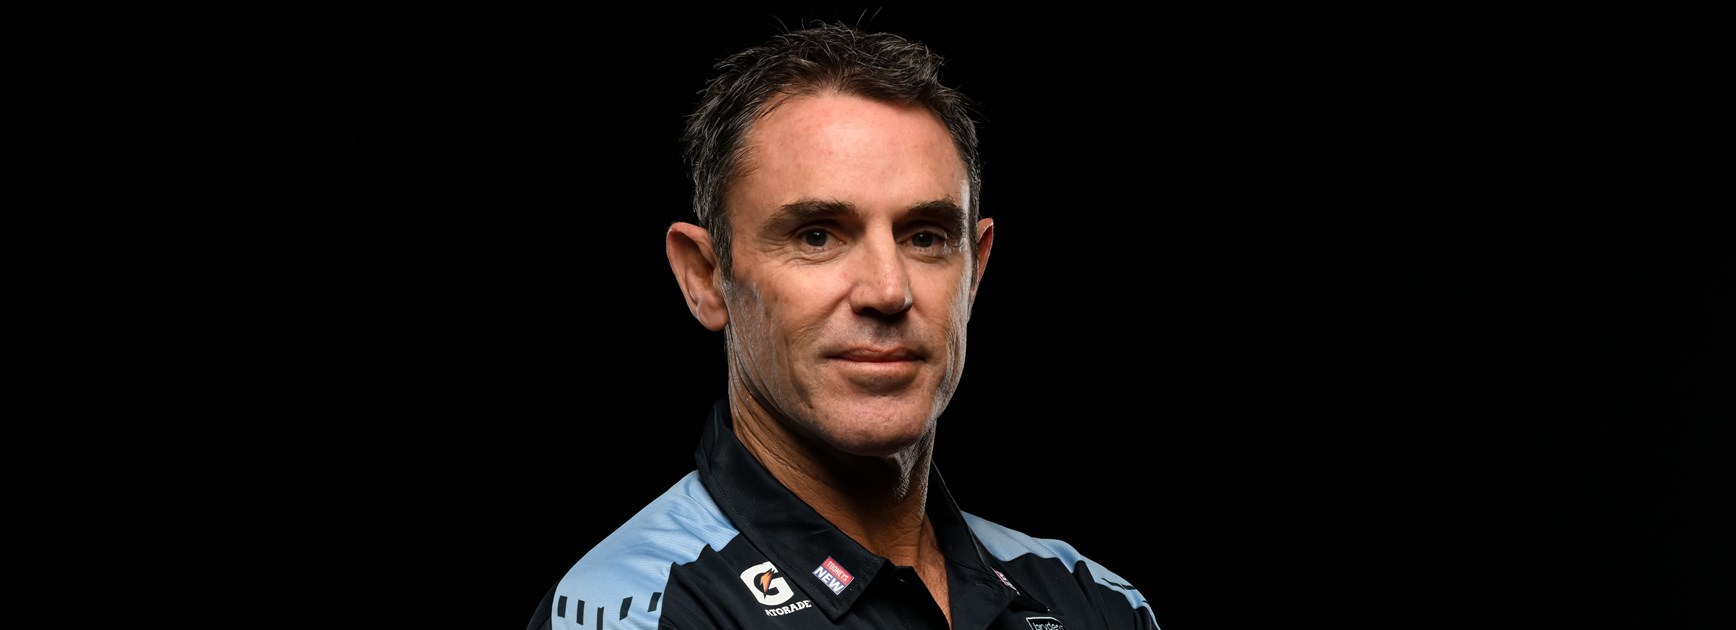 Fittler launches "Building the Blues" road safety campaign